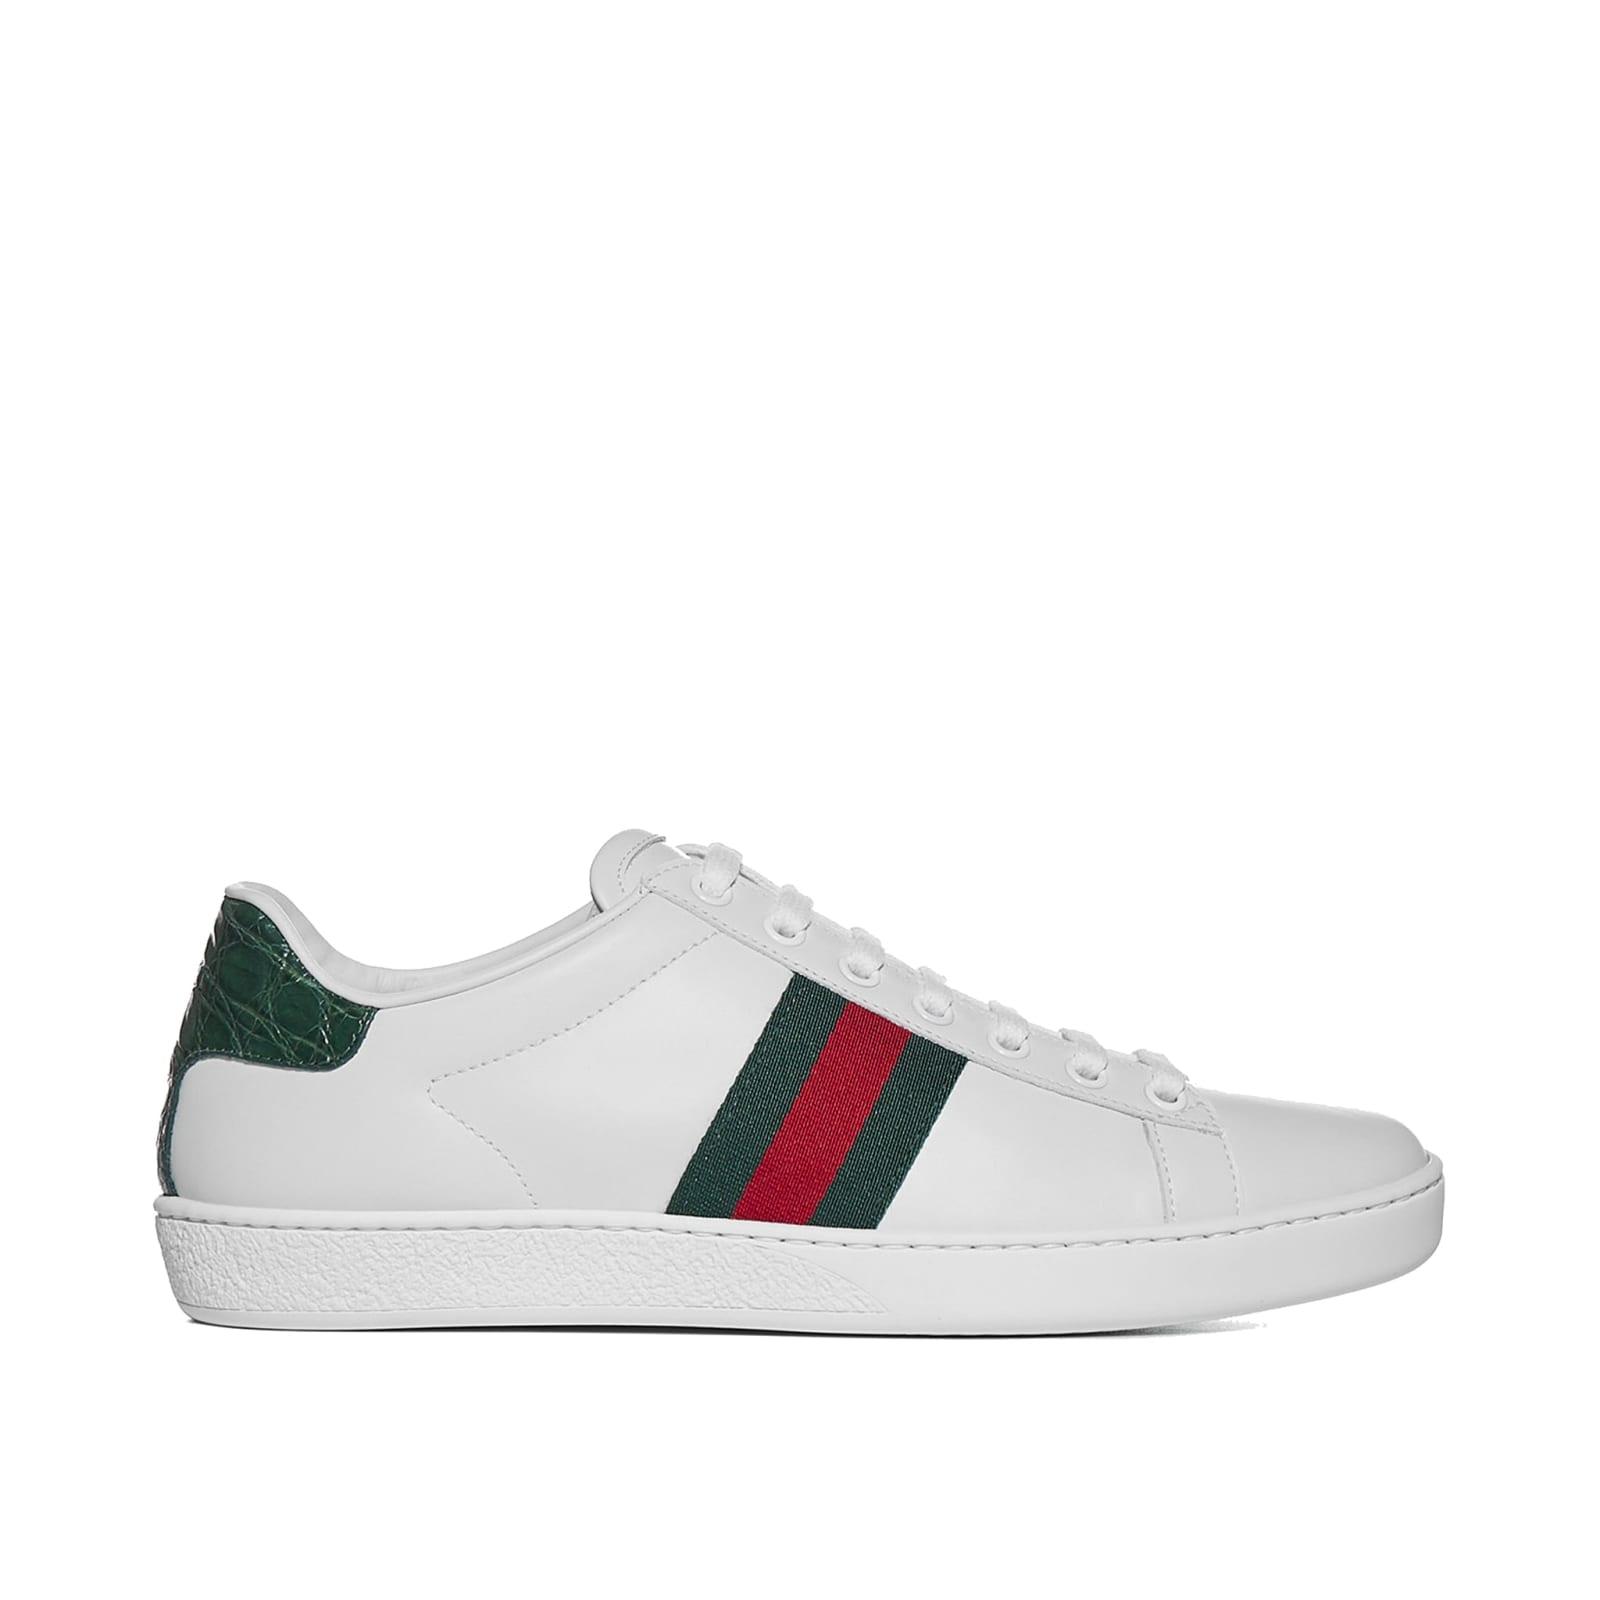 Gucci Leather Ace Sneakers in White | Lyst